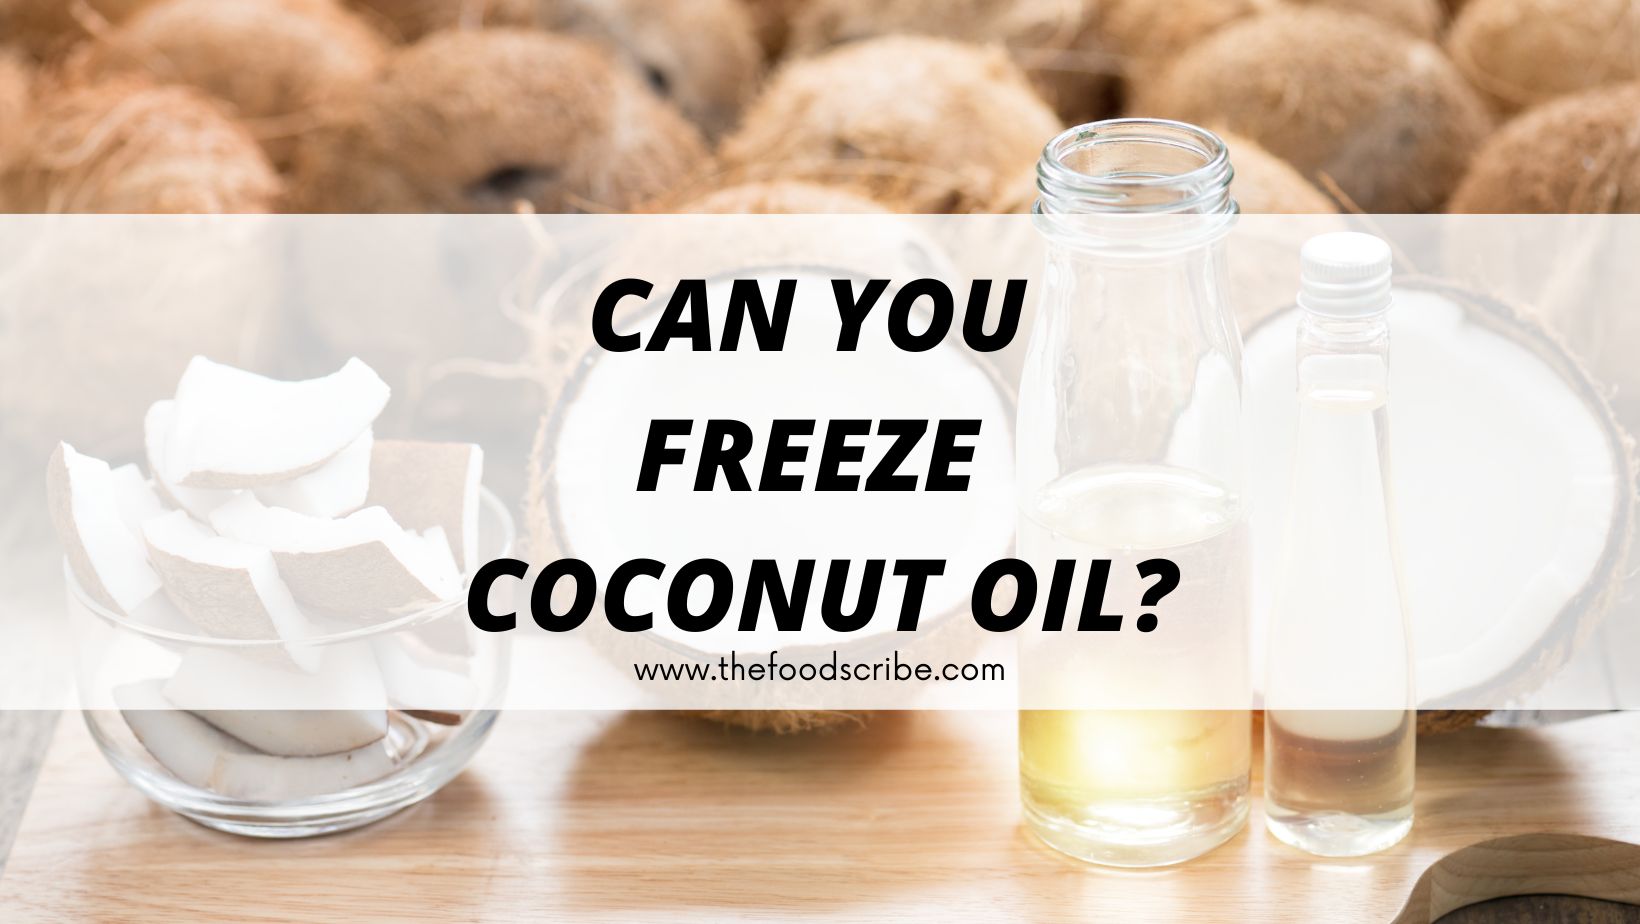 Can You Freeze Coconut Oil?